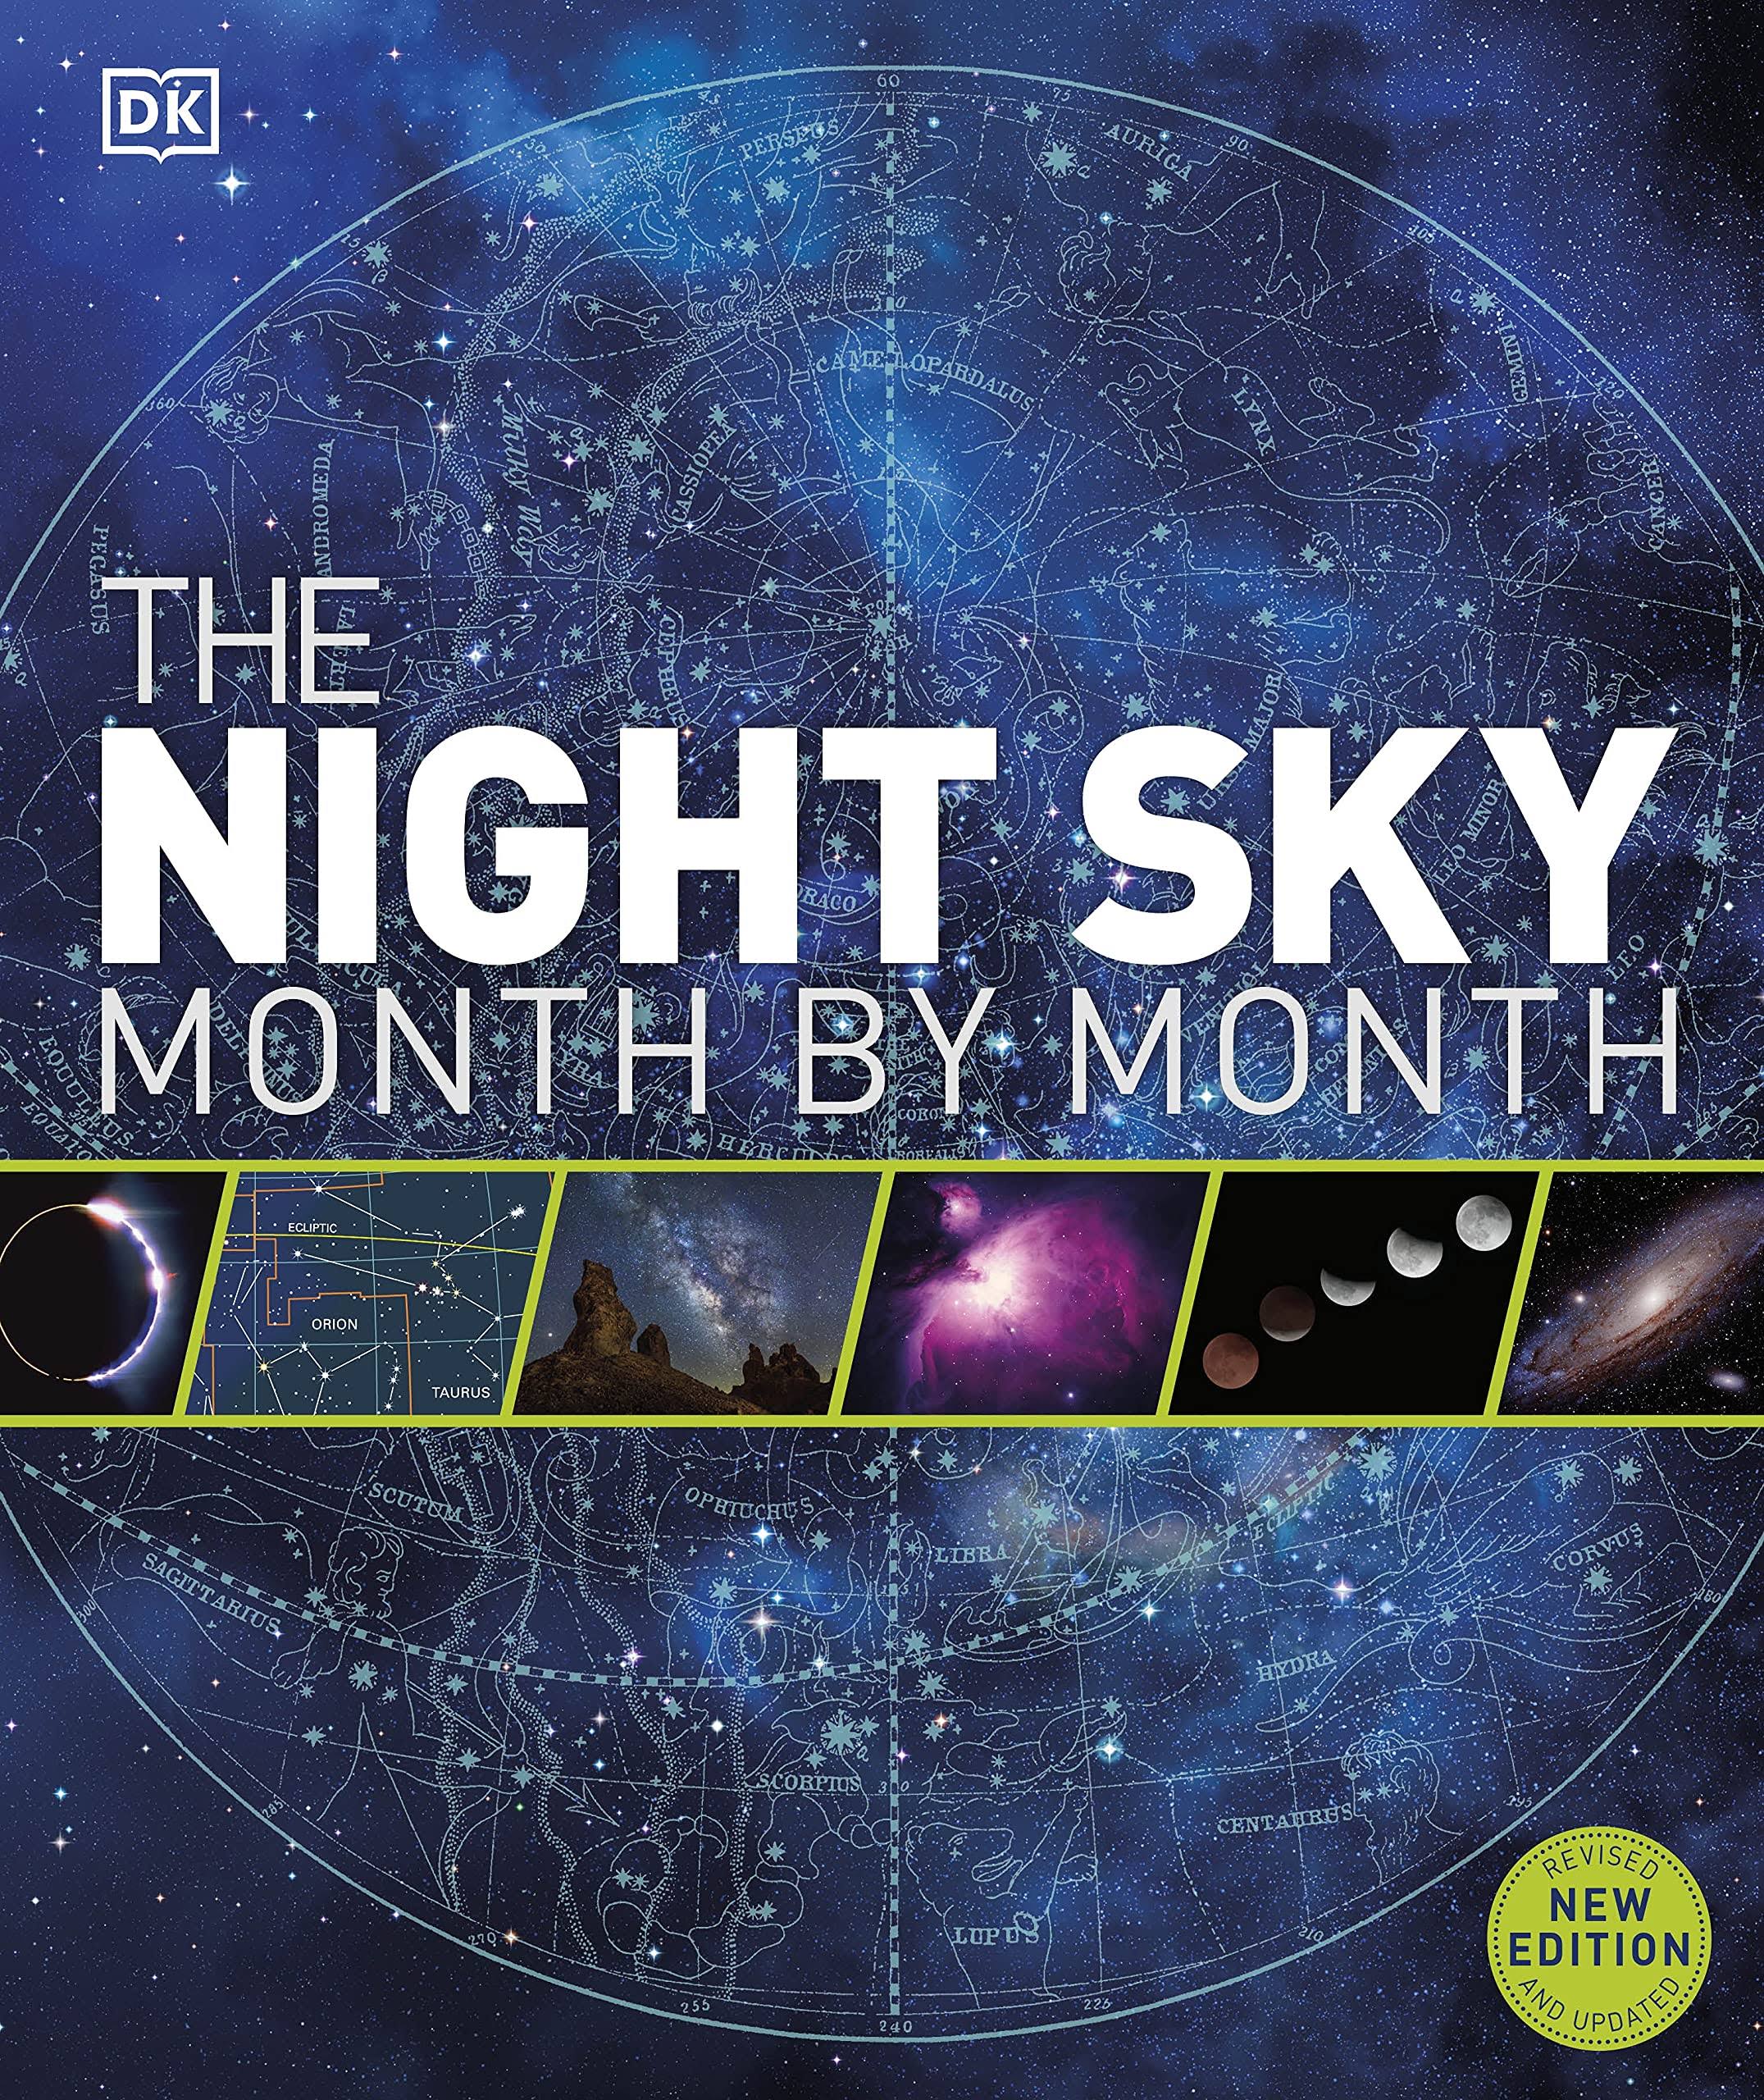 The Night Sky Month By Month by DK